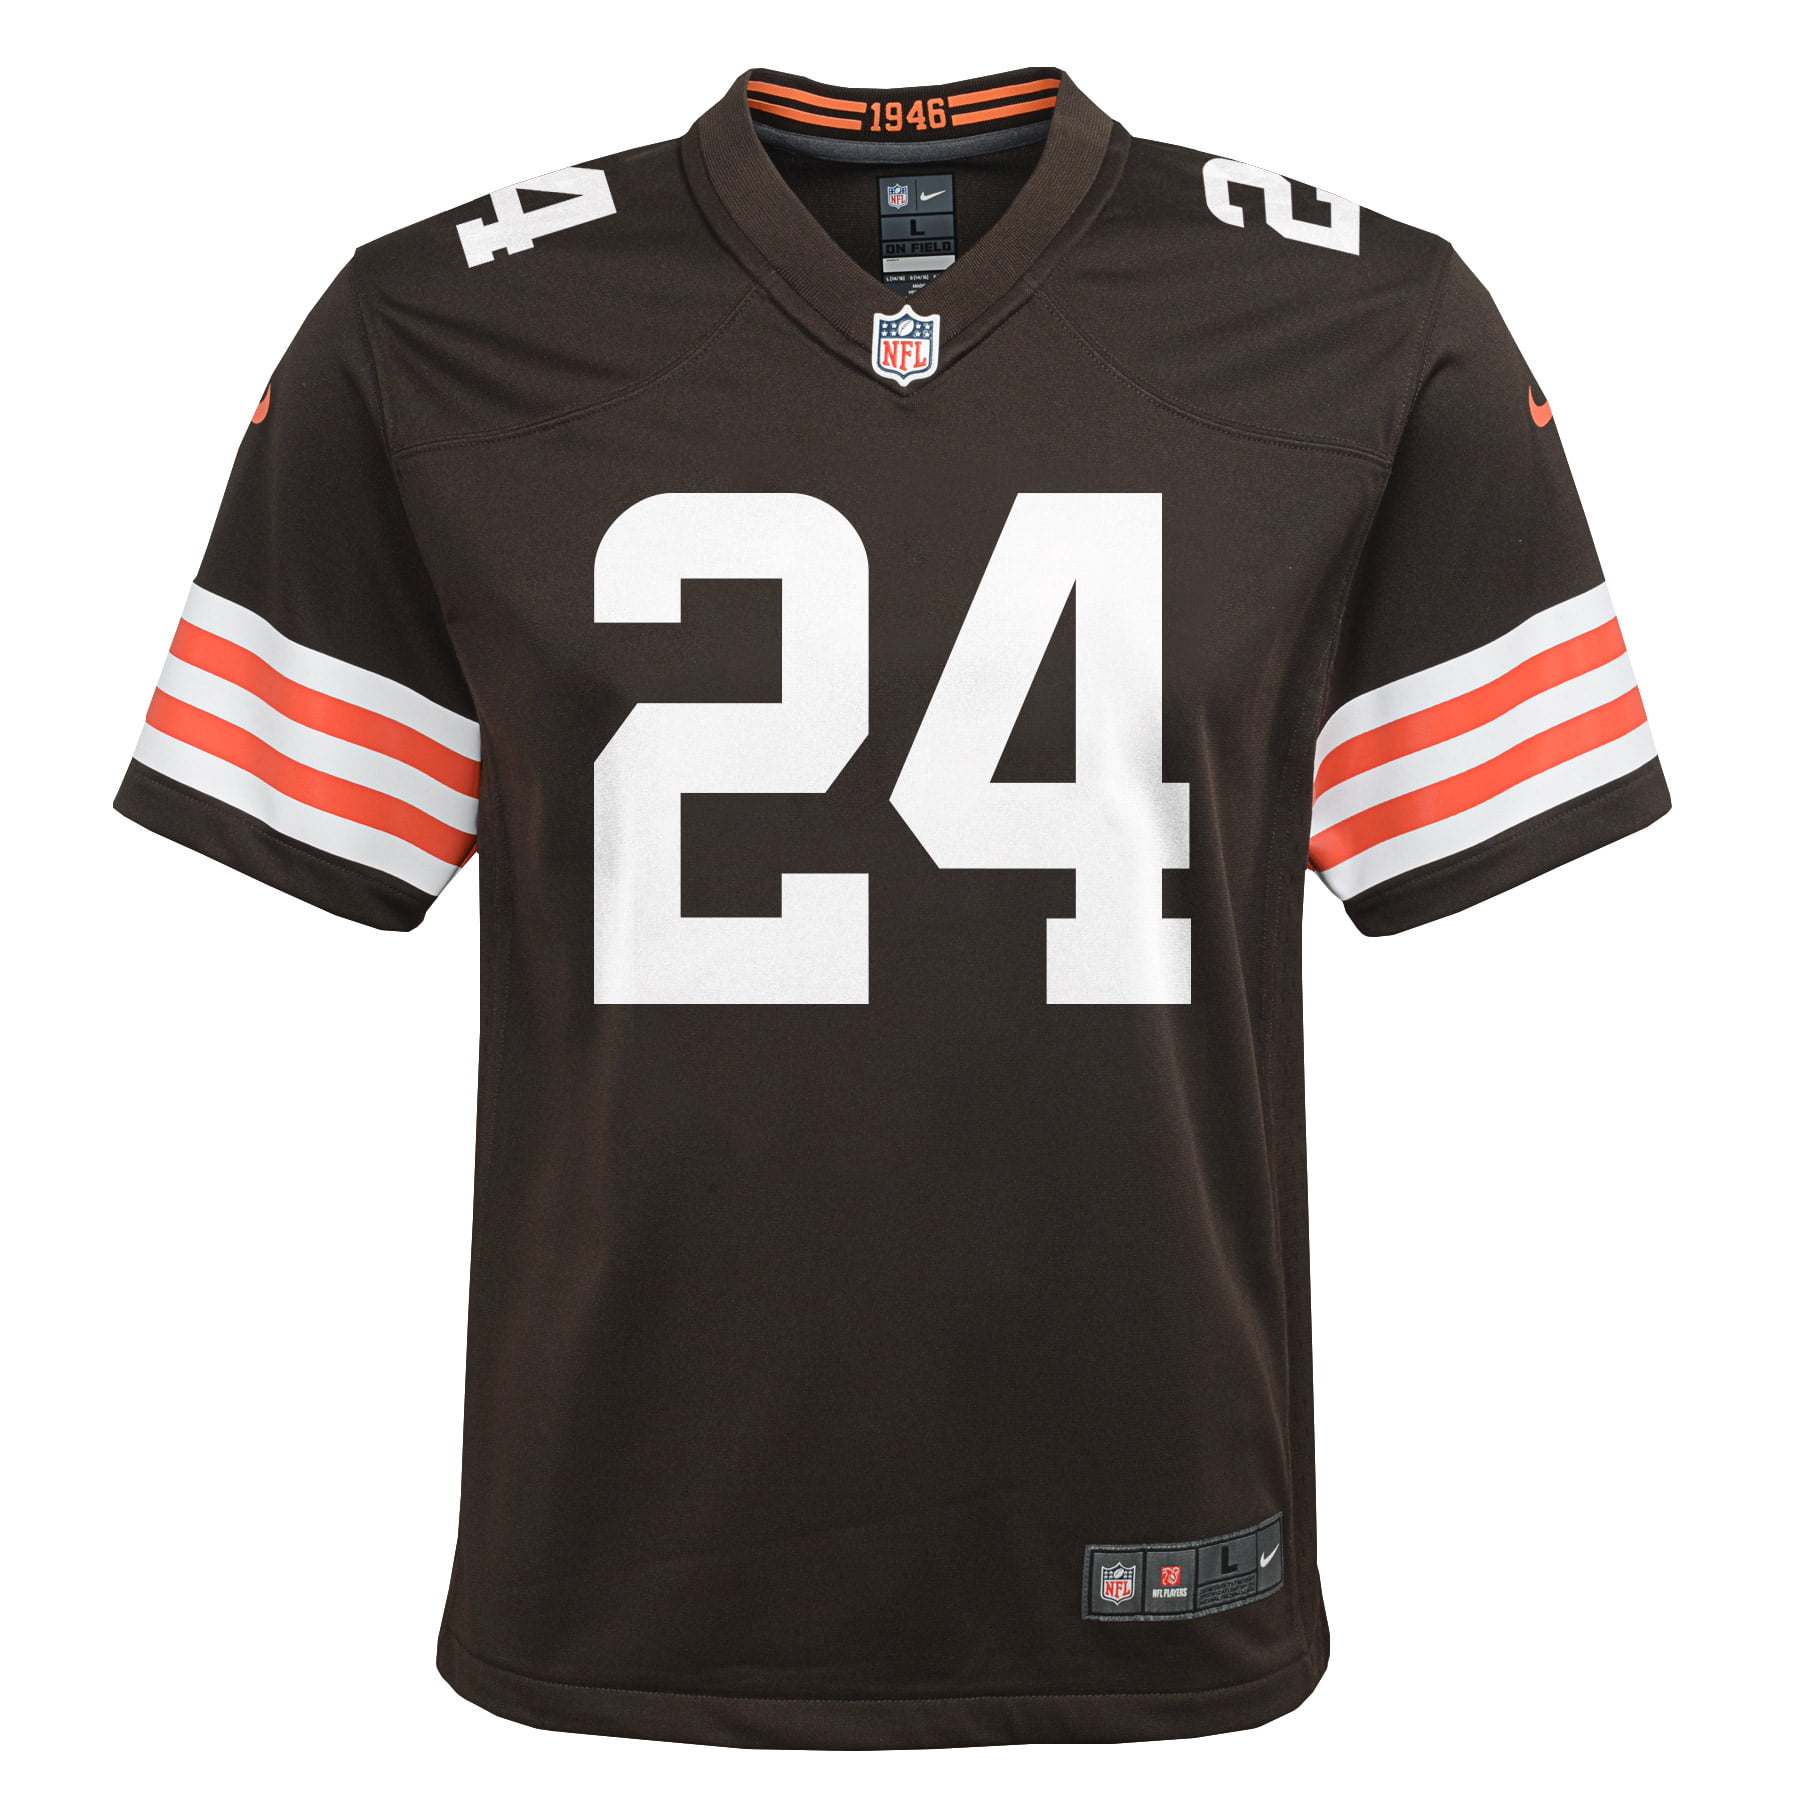 Nick Chubb Cleveland Browns Men's Nike Dri-FIT NFL Limited Football Jersey